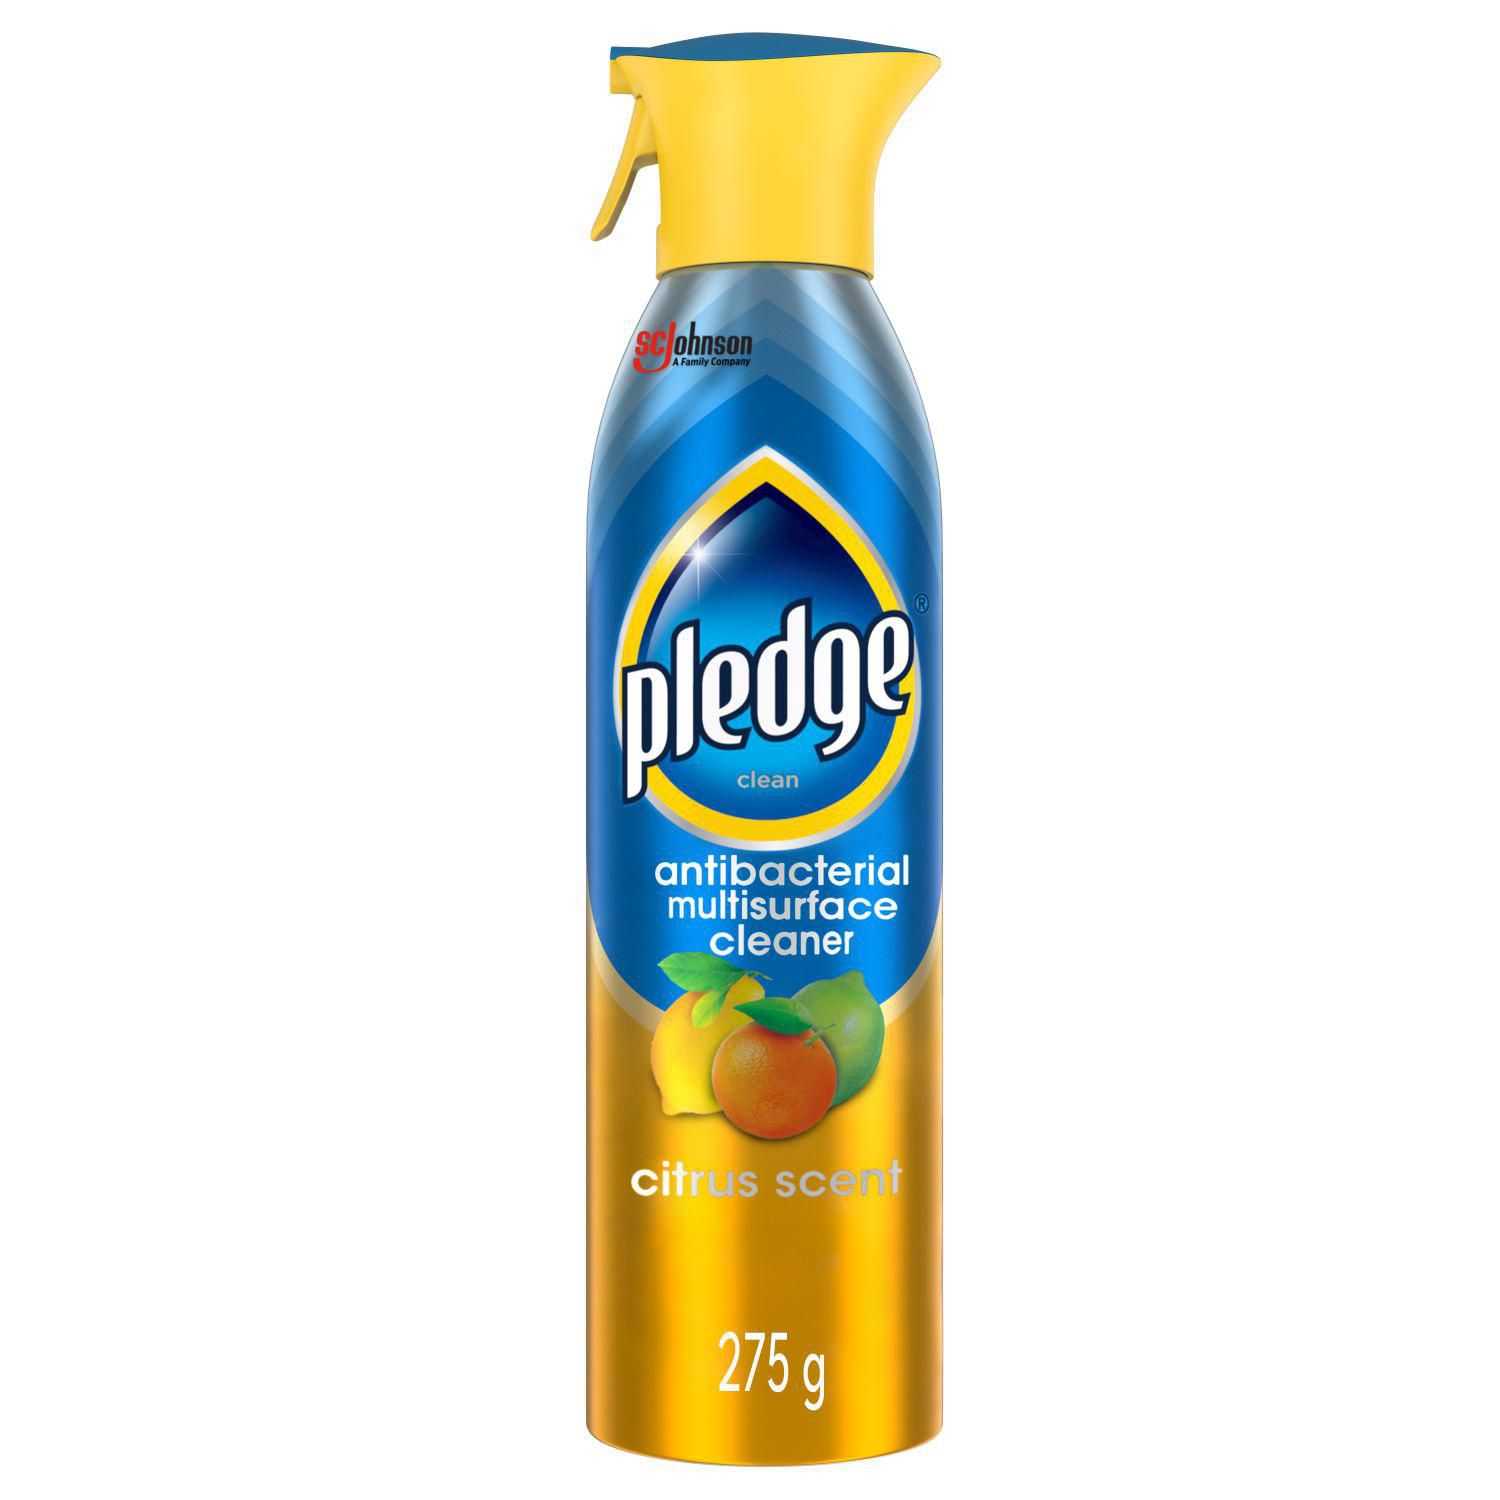 Pledge® Disinfectant Spray and All Purpose Cleaner